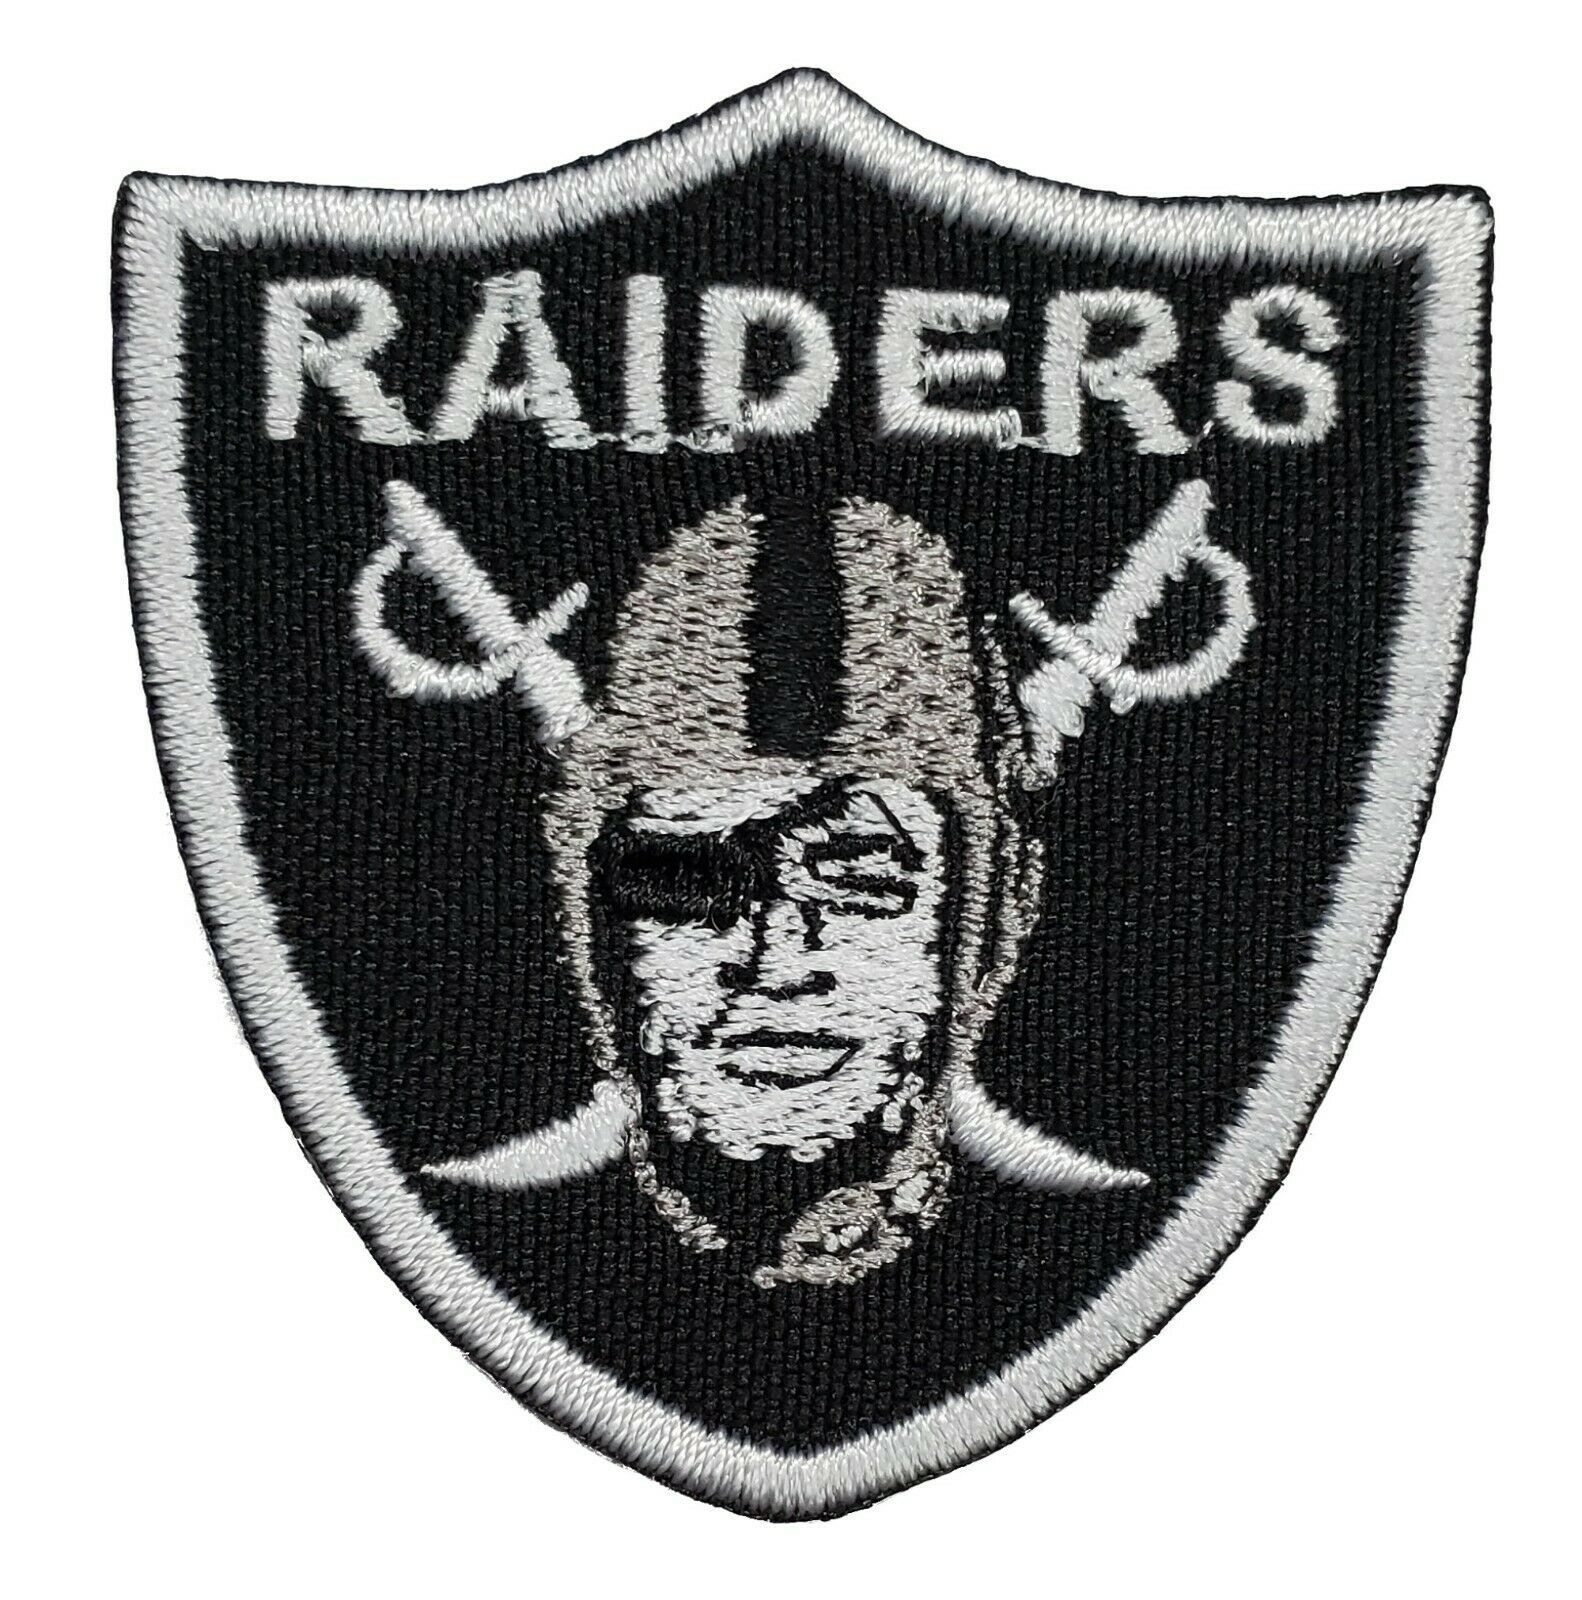 Primary image for Oakland Raiders NFL Football Super Bowl Embroidered Iron On Patch 1.85" x 2"